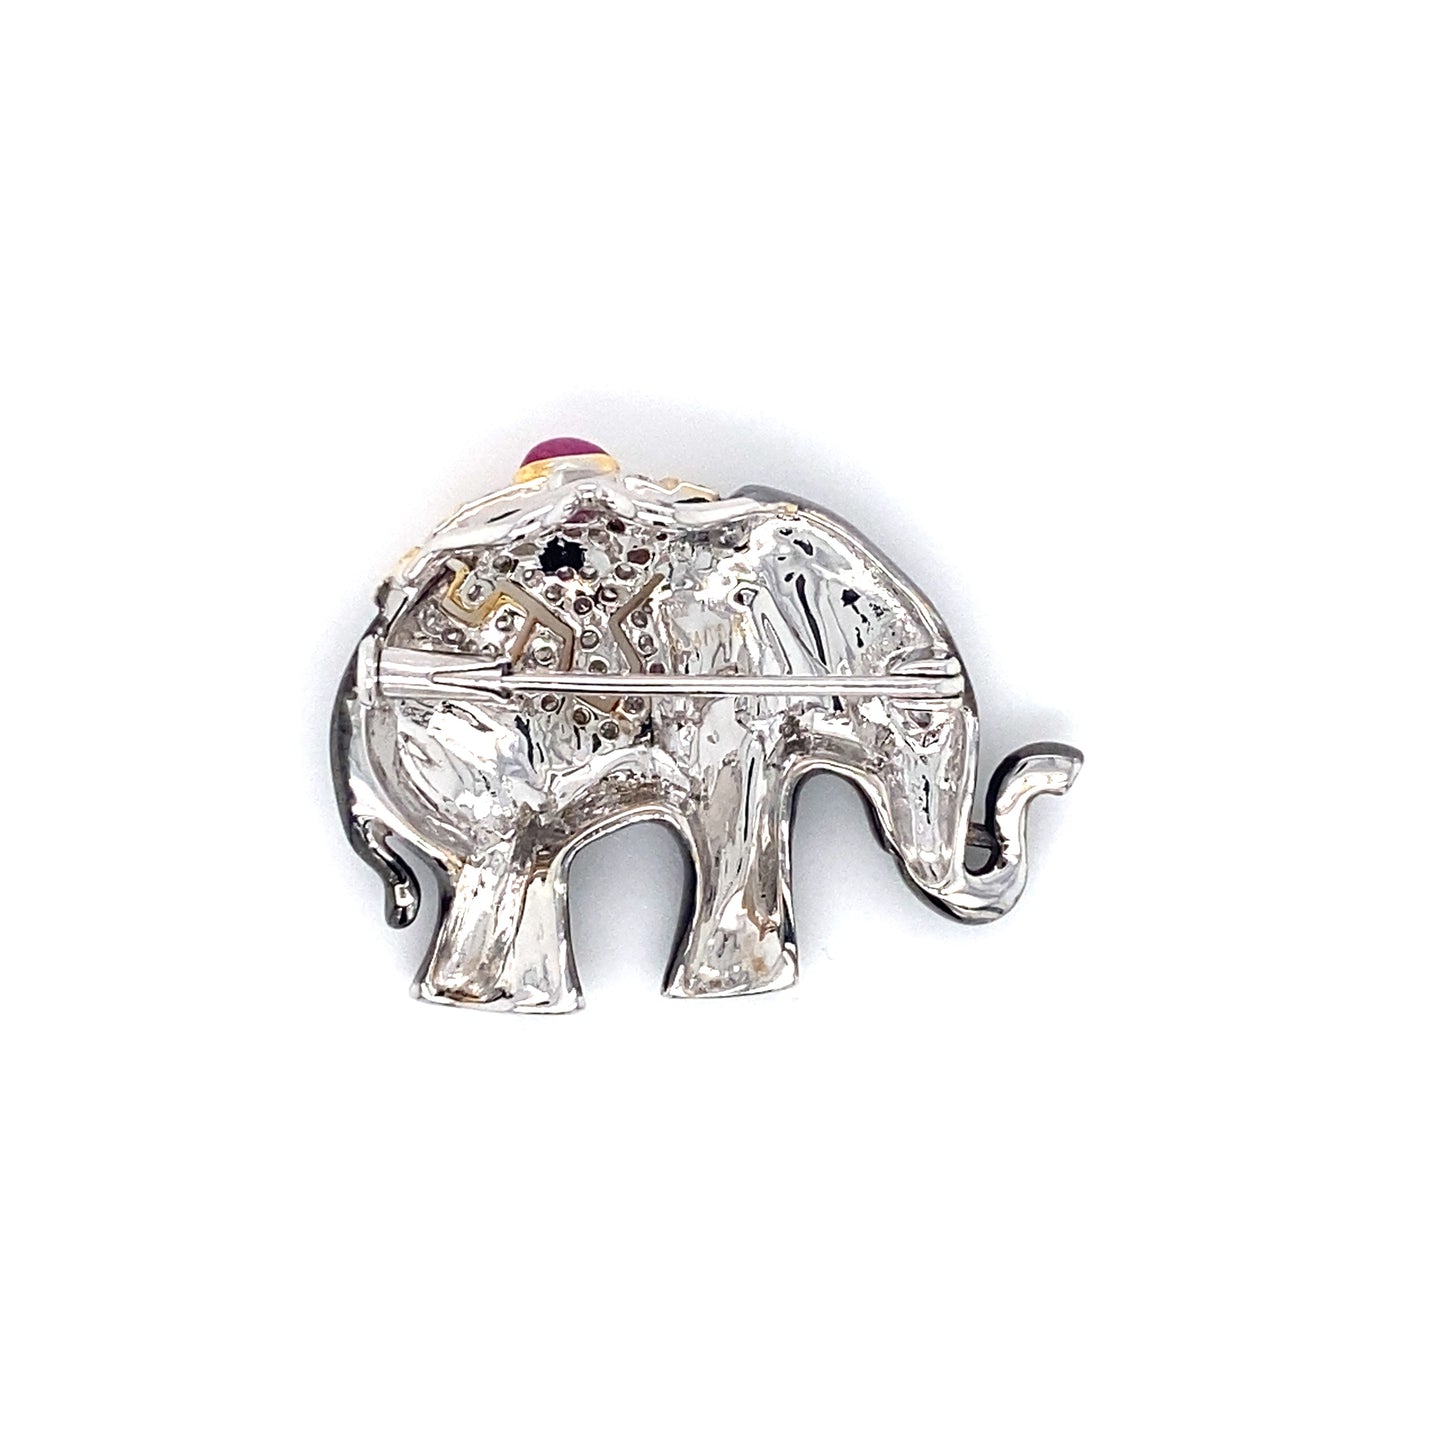 Circa 2000s Ruby and Diamond Elephant Brooch in 18K White Gold